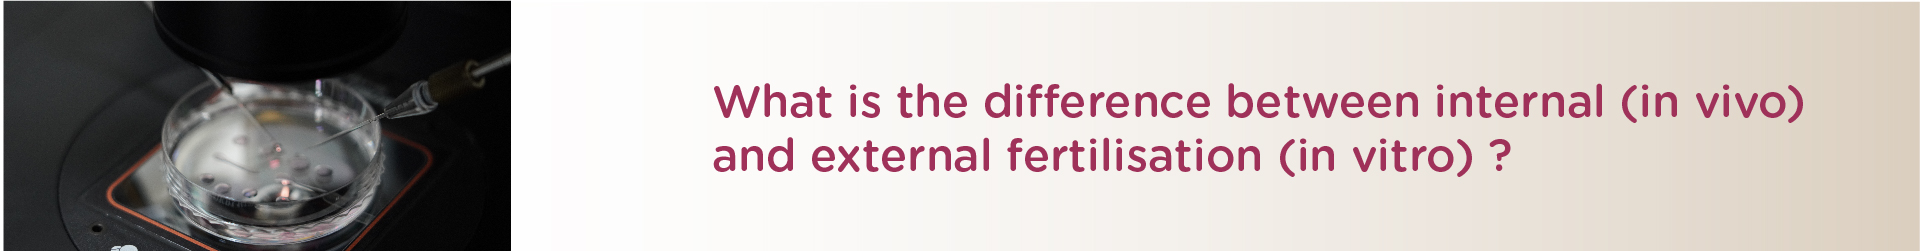 What is the Difference between Internal (In Vivo) and External Fertilization (In Vitro) ?